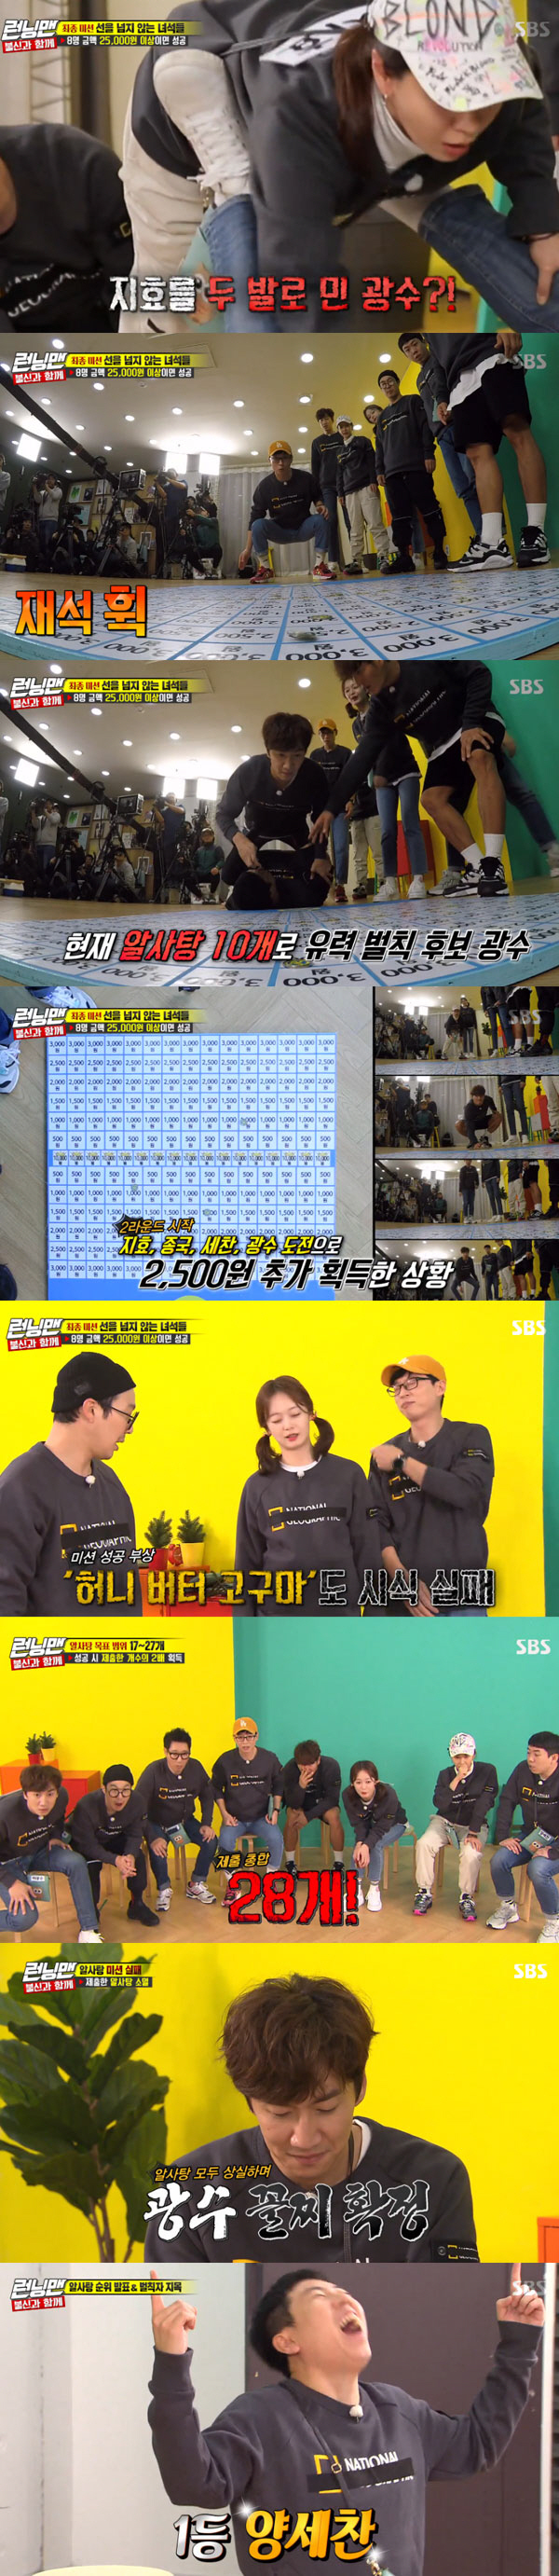 Running Man Lee Kwang-sooo and Jeon So-min win Yondu penaltyOn SBS Running Man broadcasted on the 1st, a special unity race was held for winter unique snacks from Daewang Bungbap to Ice Cream Hokok.On this day, members will be provided with Top Model for four power pass missions and delicious winter snacks for mission success.If the mission fails, one final penalty will be added: The penalty of the day is to sell 100 buns after Yondu make up.Members are given 10 egg candy; the final penalty is selected as the number of egg candy, the member with the most final egg candy wins, and the winner wins the product and penalty exemption.Penalties will be received in the order of fewer eggs, although if all four power pass missions are successful, the power penalty will be exempted.The first mission is to solve the problem where the ball is attached by kicking the ball on the scoreboard with 10 to 40 points with the Quiz King Shooter.If you achieve a total of 100 points within one opportunity per person, it is a mission success.The English word 20 points, music 30 points, and the top model on the problem of 20 people failed in succession.With the rightening the main character of the childhood photo, the members succeeded in meeting the correct answer to Kim Yeon-a, Lee Young-ae, and Kang Na.However, Lee Byung-hun and Jeon Do-yeon failed to write a movie, failed to match the full name of Putin in succession.So, the production team listens to the scope of submitting the egg candy, and submits the egg candy as privately as one person wants, and if the total of the egg candy submitted by eight people is within the scope of Jessie, it gets twice as much.On the contrary, if you do not enter the range, all the submitted eggs will disappear.Since then, there have been 19 to 29 eggs candy produced by the production team, but the number of eggs candy produced by the members failed to reach 16.The second round is Bob My Way, where you can choose one of the eight foods that are priced differently.If the total amount is less than 30,000 won, you can pass the power through mission, Choices menu and snack.In addition, if you are between 30,000 won and 50,000 won, you can fail to pass the power, but you can have a Choices menu and snack.However, if the total amount is 50,000 won, the power pass is failed.Haha was formal in Dongas, Song Ji-hyo was choices, Yoo Jae-Suk ramen, Lee Kwang-sooo ramen, Yang Se-chan was choices ramen, and Ji Suk-jin was choices choices soy sauce and poured cold water.However, Kim Jong-kook was served with tteokbokki, especially Jeon So-min, Choices boiled eggs, and meals and snacks were provided to the members.The Al Candy Dilemma was held to acquire Al Candy with the success of power passing mission.Each person writes one of the numbers up to 1 to 10 privately, and the person who wrote the highest number except for the duplicated number is paid the number of eggs.Yoo Jae-suk and Song Ji-hyo, Yang Se-chan were number 10, Jeon So-min was 4, Lee Kwang-sooo was 7, Ji Suk-jin and Haha were 8 and Kim Jong-kook was alone in 9 and succeeded in acquiring Al-Satang.The third mission is Answer the category, and it is a success if you listen to the category Jessie and answer the word in 8 seconds so that the word does not overlap.However, the members who failed to commission, but the crew members who made the egg candy in the scope of Jessies egg candy submission, doubled the egg candy.The last mission is Boys who do not cross the line, throwing RCOIN at the desired point on the panel with 500 ~ 10,000 won, and if the amount obtained by 8 people is over 25,000 won, the RCOIN must enter the corresponding amount, and if it reaches or exceeds the line, it fails to acquire the amount.Kim Jong-kook succeeded at 2,000 won as soon as he started, and Yang Se-chan succeeded at 10,000 won.However, Haha succeeded in 500 won, followed by Song Ji-hyo, Ji Suk-jin, Yoo Jae-Suk, Jeon So-min and Lee Kwang-sooo failed to top model.Since then, the production team has sacrificed 17 ~ 27 eggs, and the number of eggs candy gathered was 28.As a result, Yang Se-chan ranked first with 18, Kim Jong-kook with 17, Ji Suk-jin with 15, Song Ji-hyo with 13, Yoo Jae-Suk and Haha with 12, Jeon So-min with 10, Lee Kwang-soo It was last place.Three people were penalized to sell crumbs to Kim Jong-kook, who was named by the two, with Lee Kwang-sooo and Jeon So-min confirmed.